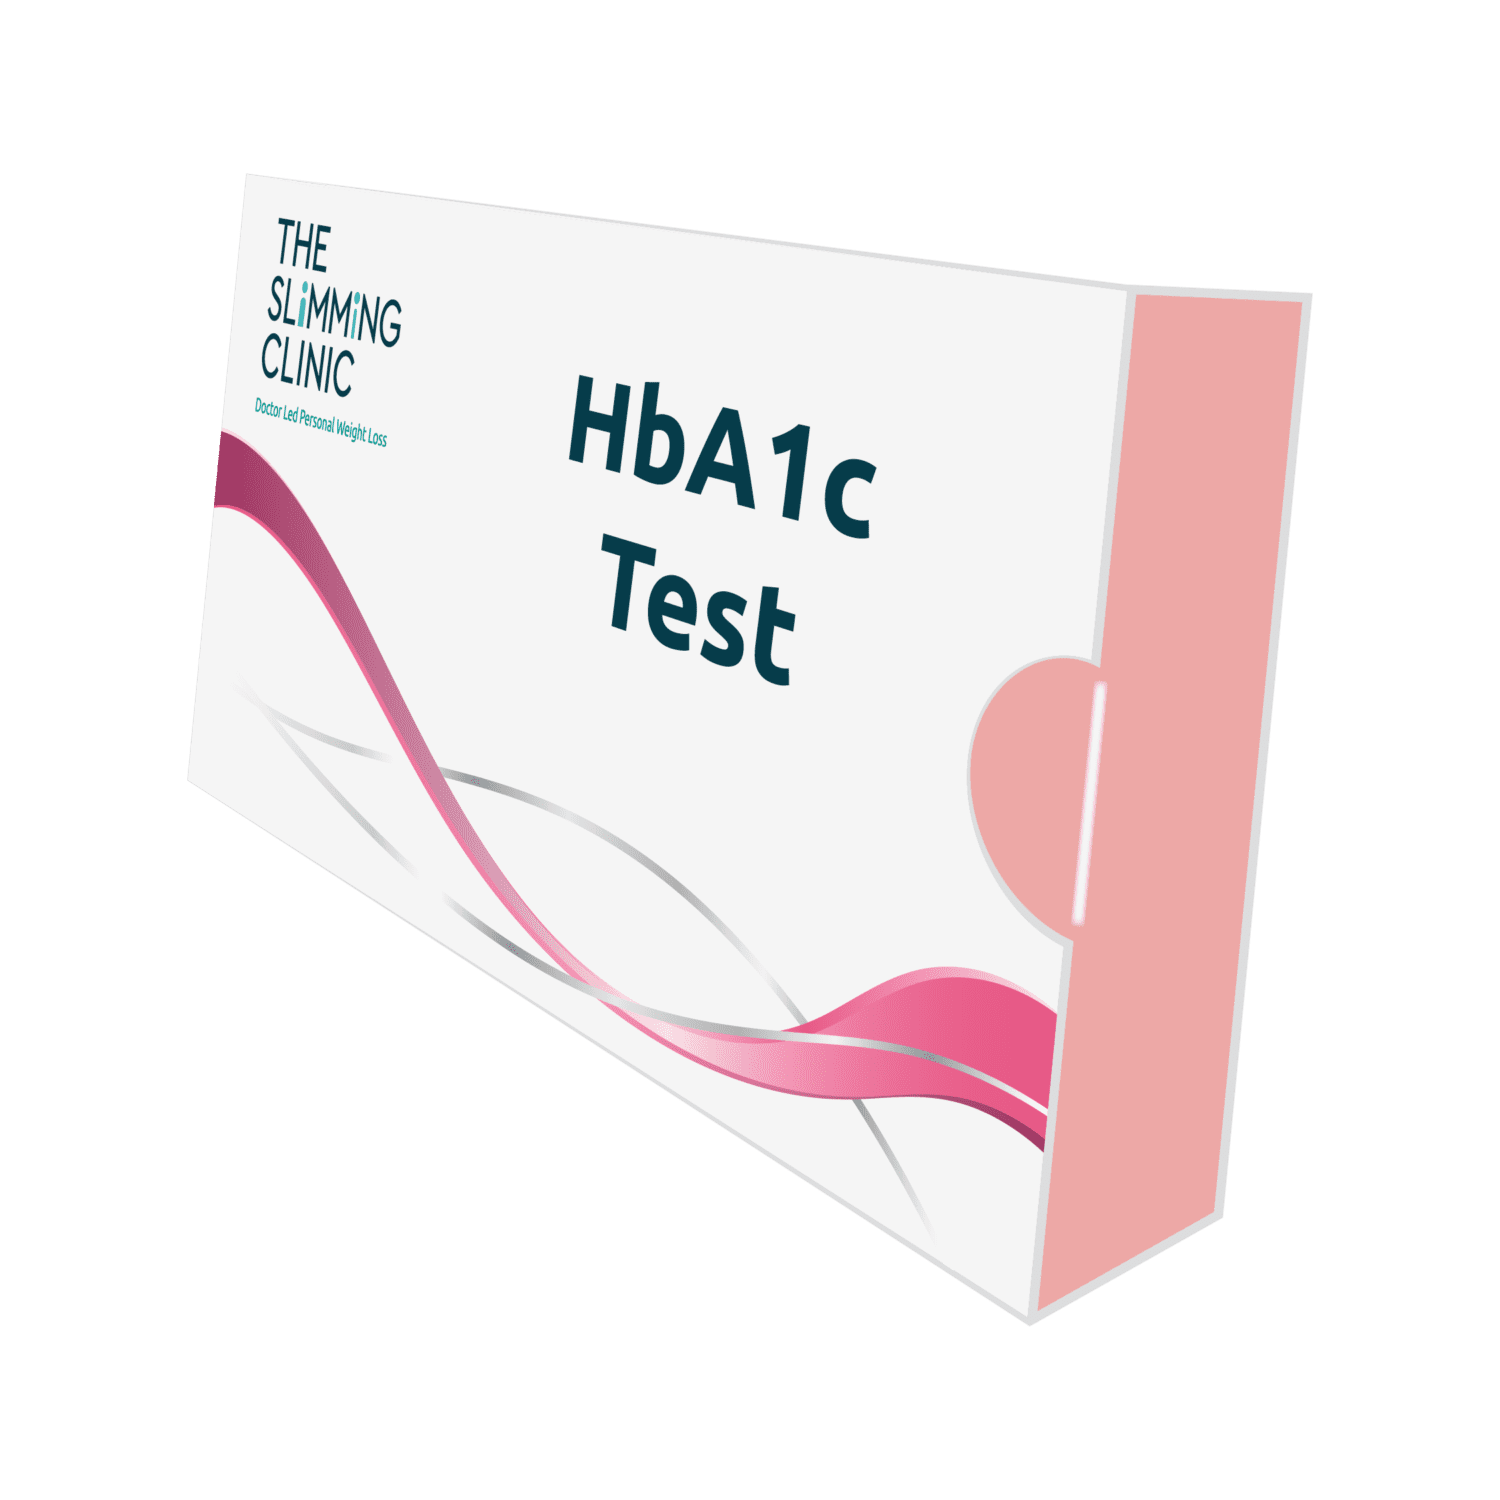 HbA1c Test From The Slimming Clinic